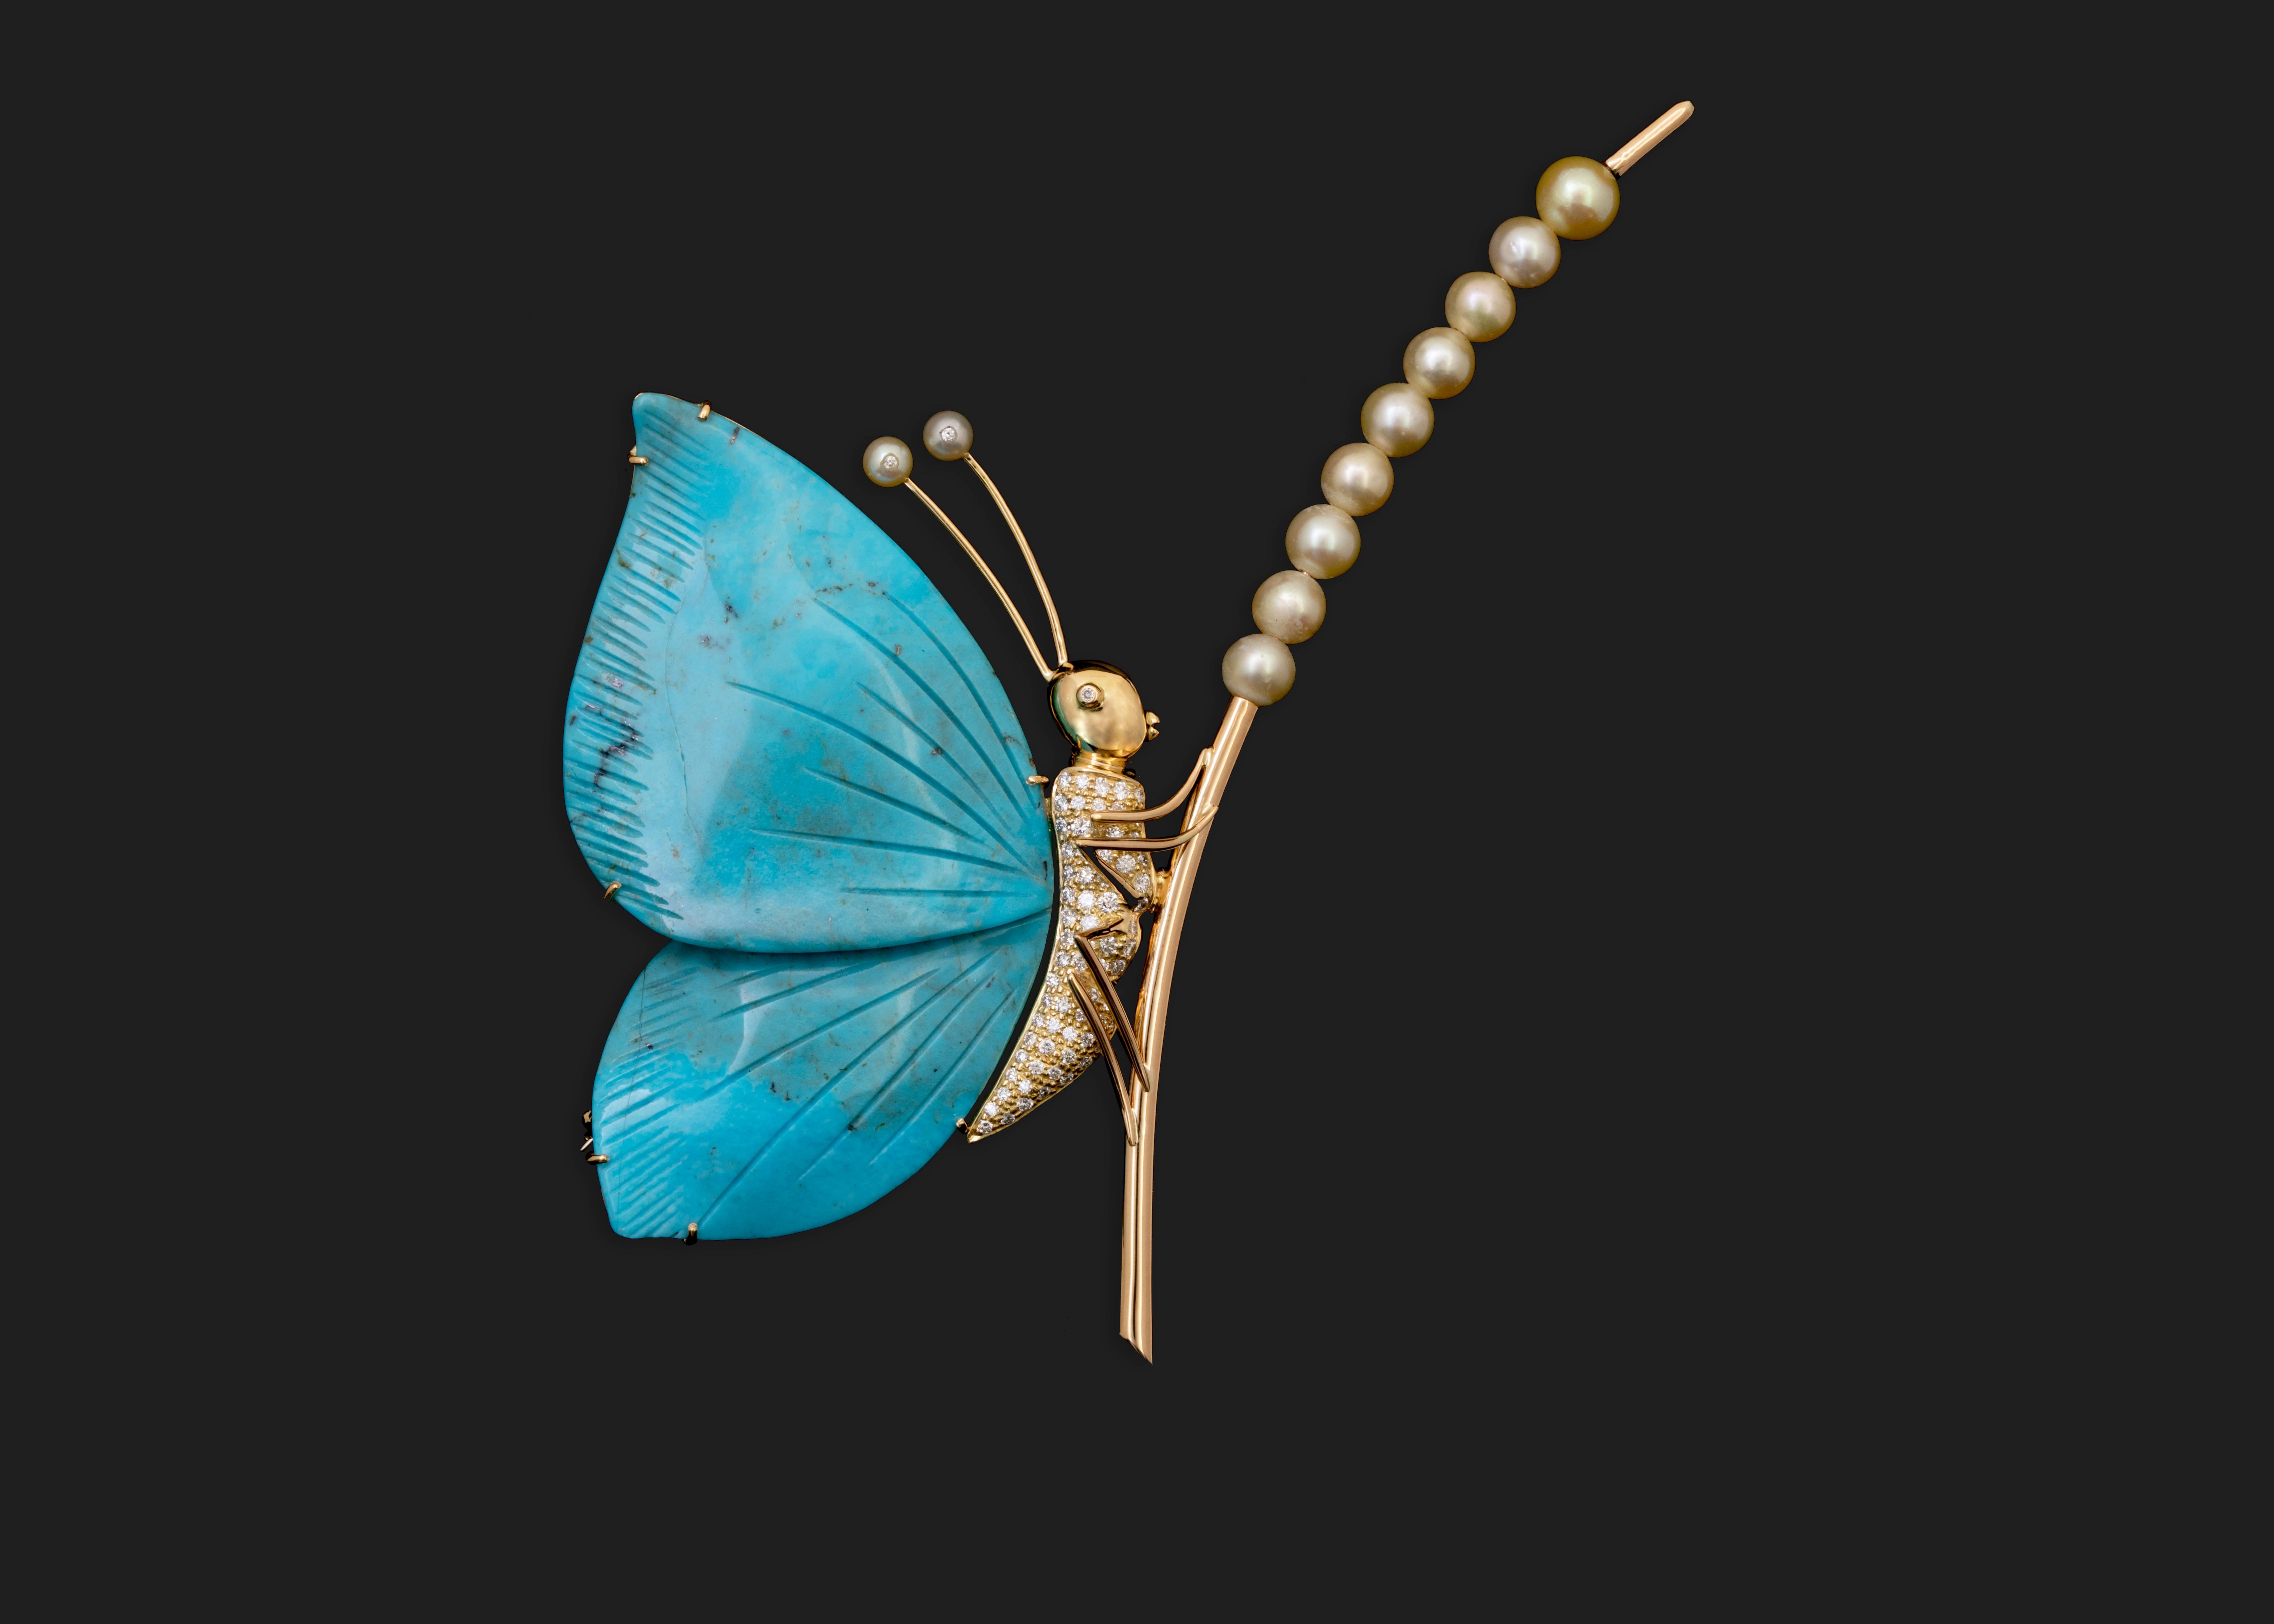 This uniquely carved turquoise stone resembling a butterfly's wing was the inspiration behind this showstopper Brooch.
An 18k yellow gold, diamond studded butterfly stands with glory on a branch of near round Bahraini Pinctada Radiata pearls.

*